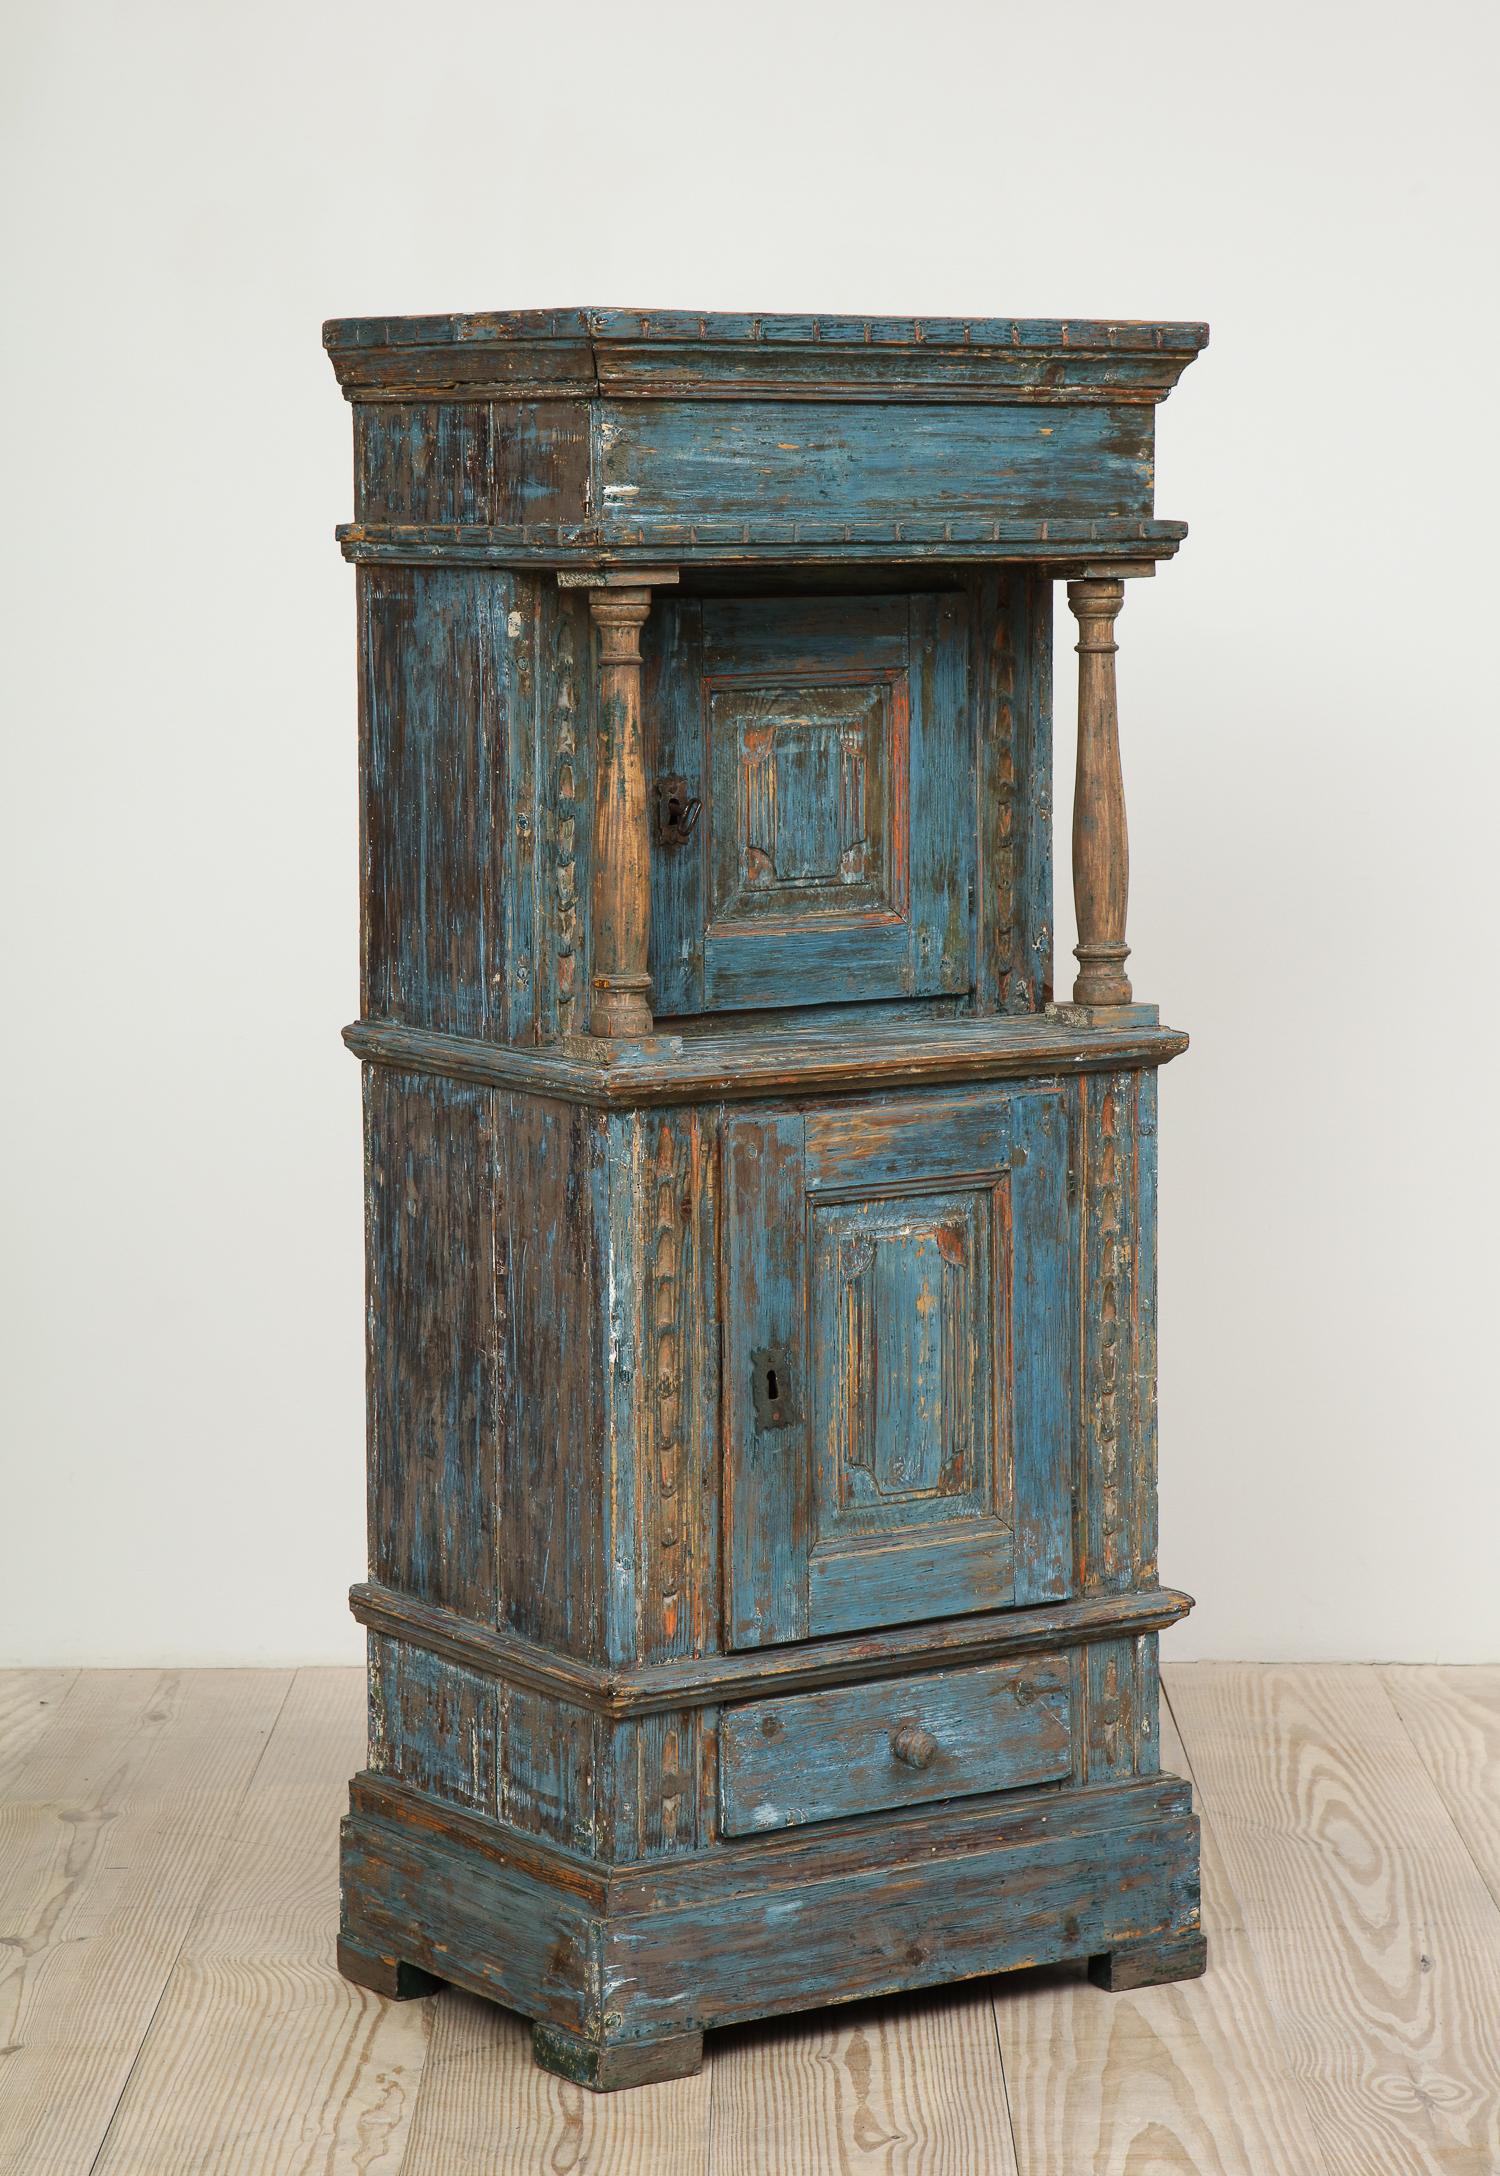 Charming, Danish Renaissance Revival cabinet, origin: Denmark, circa 1750, with upper and lower doors and lower drawer all in original blue paint and red interior.

Similar style cabinets can be seen in Rosenberg Castle (Rosenborg Slot) - a